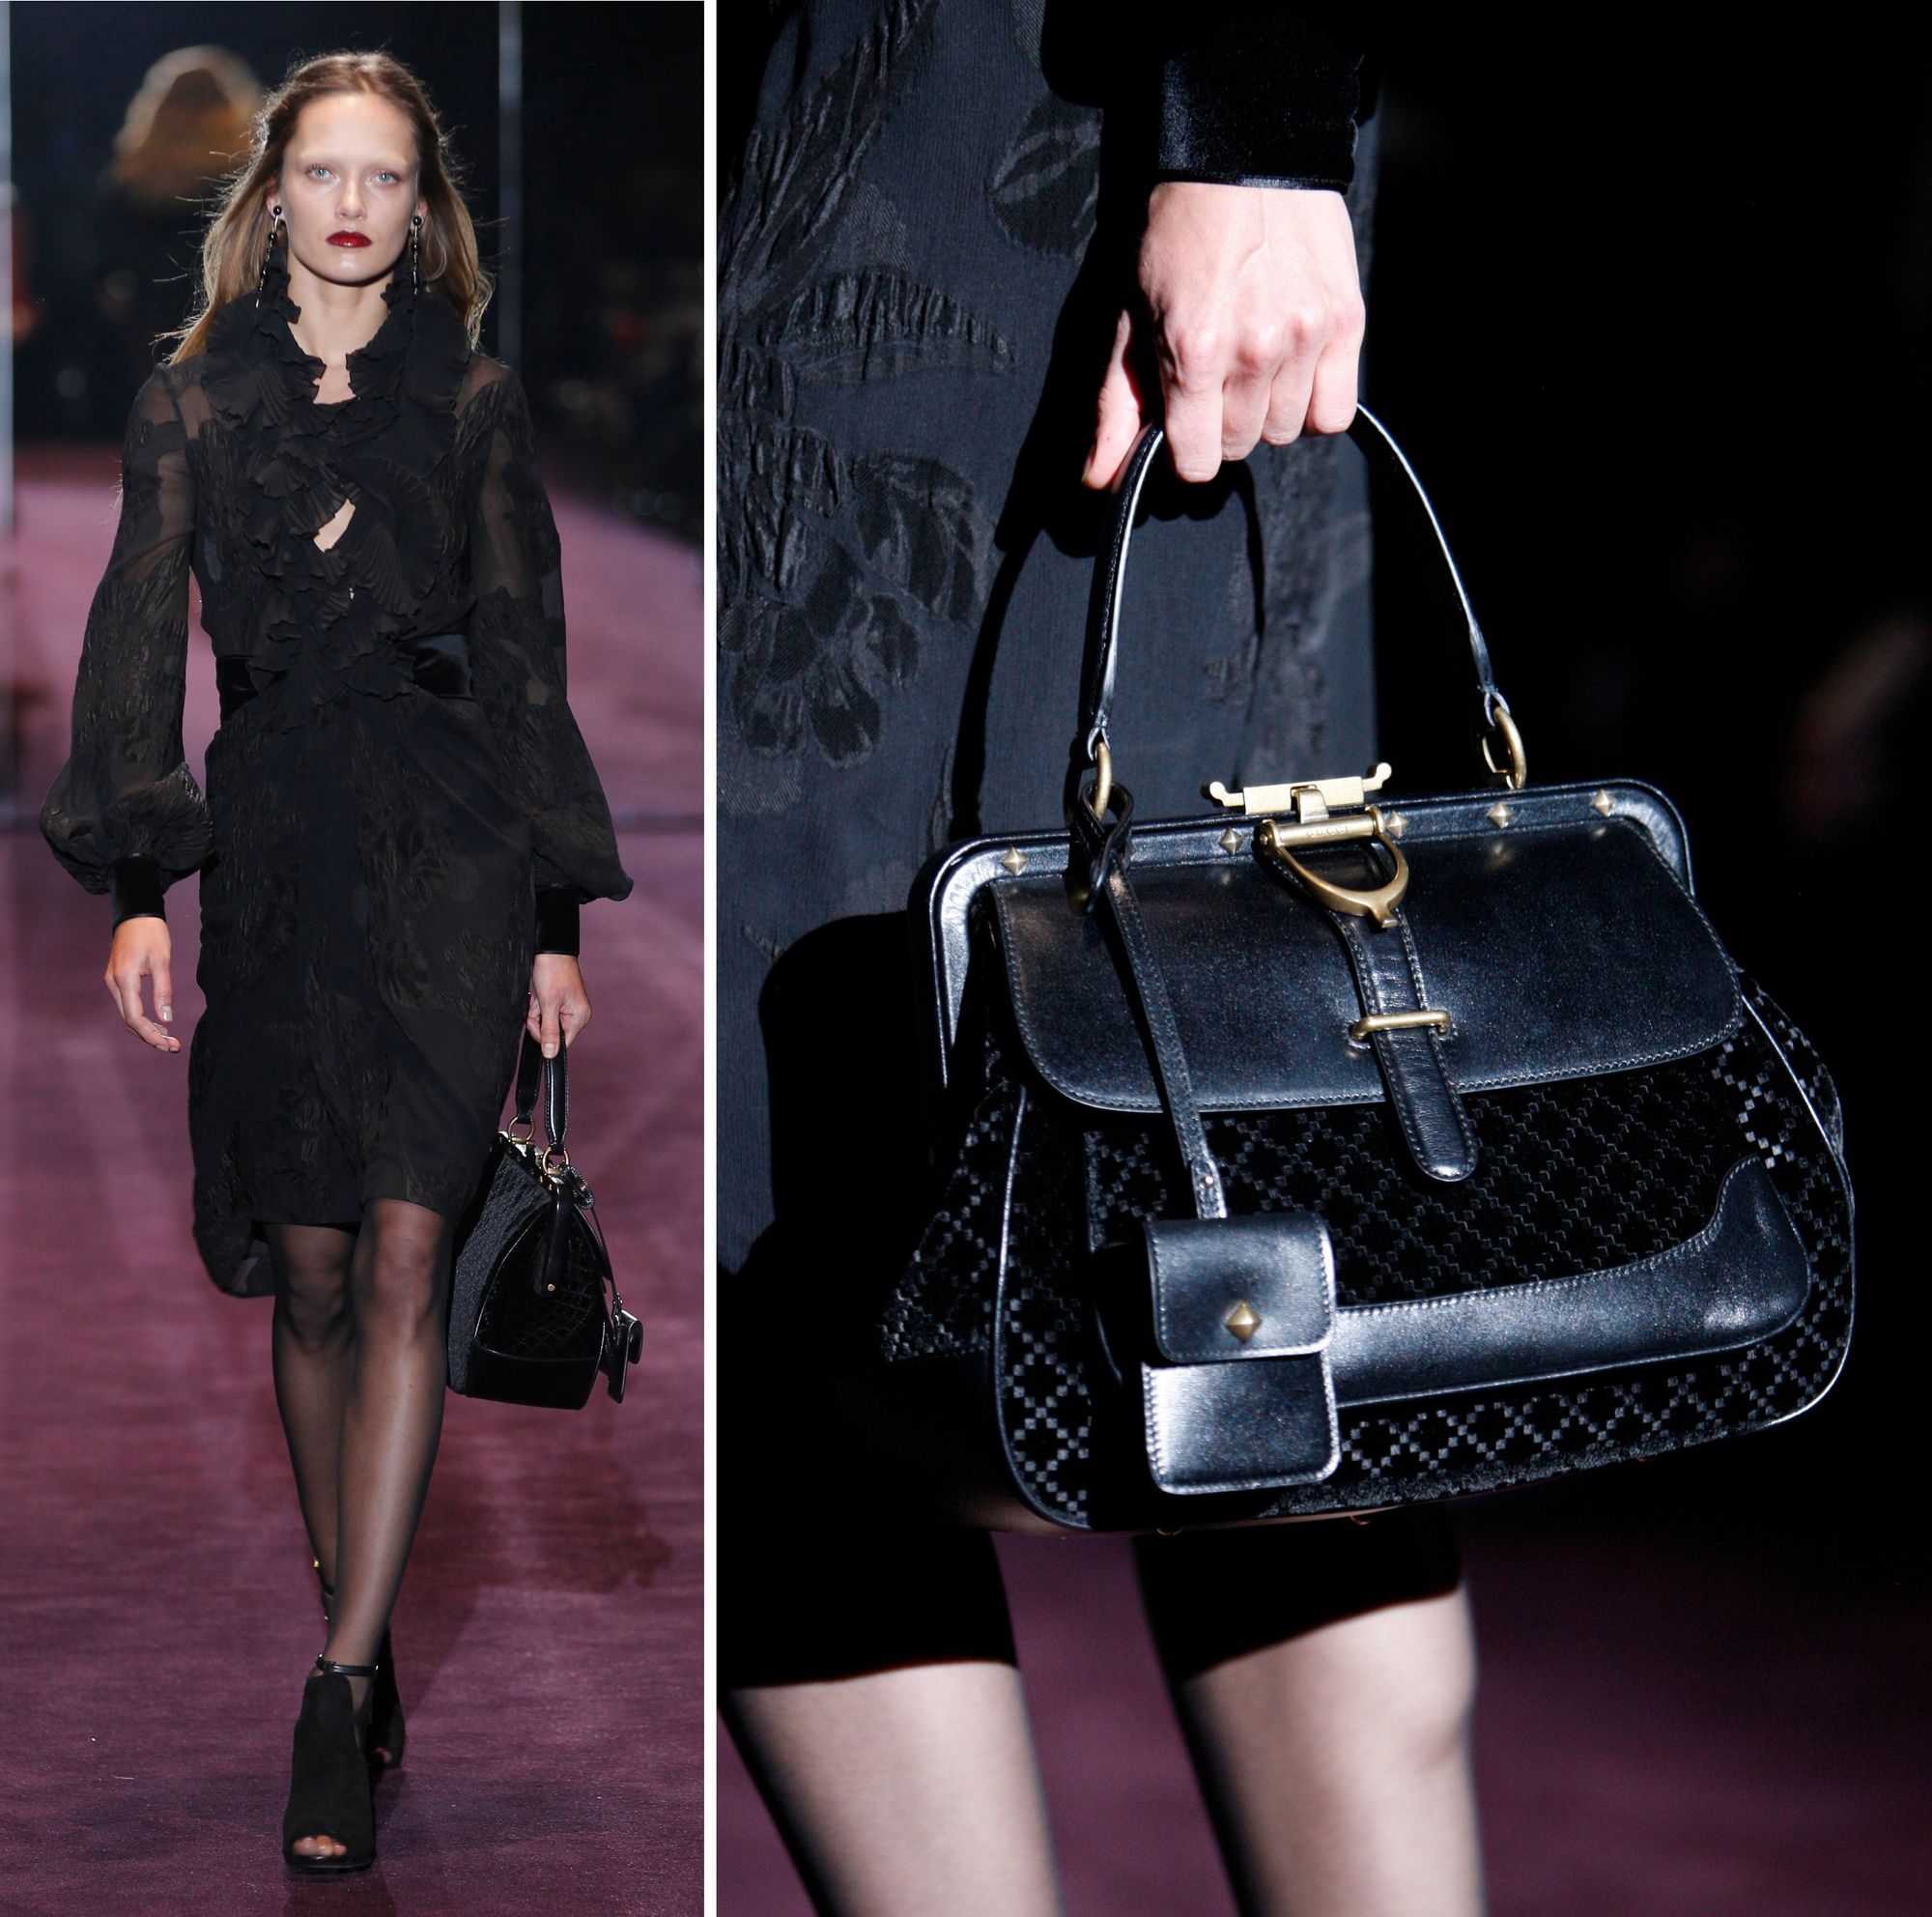 The Gucci 'Lady Stirrup' bag at the Autumn/Winter 2012 runway (Photo courtesy | Gucci)